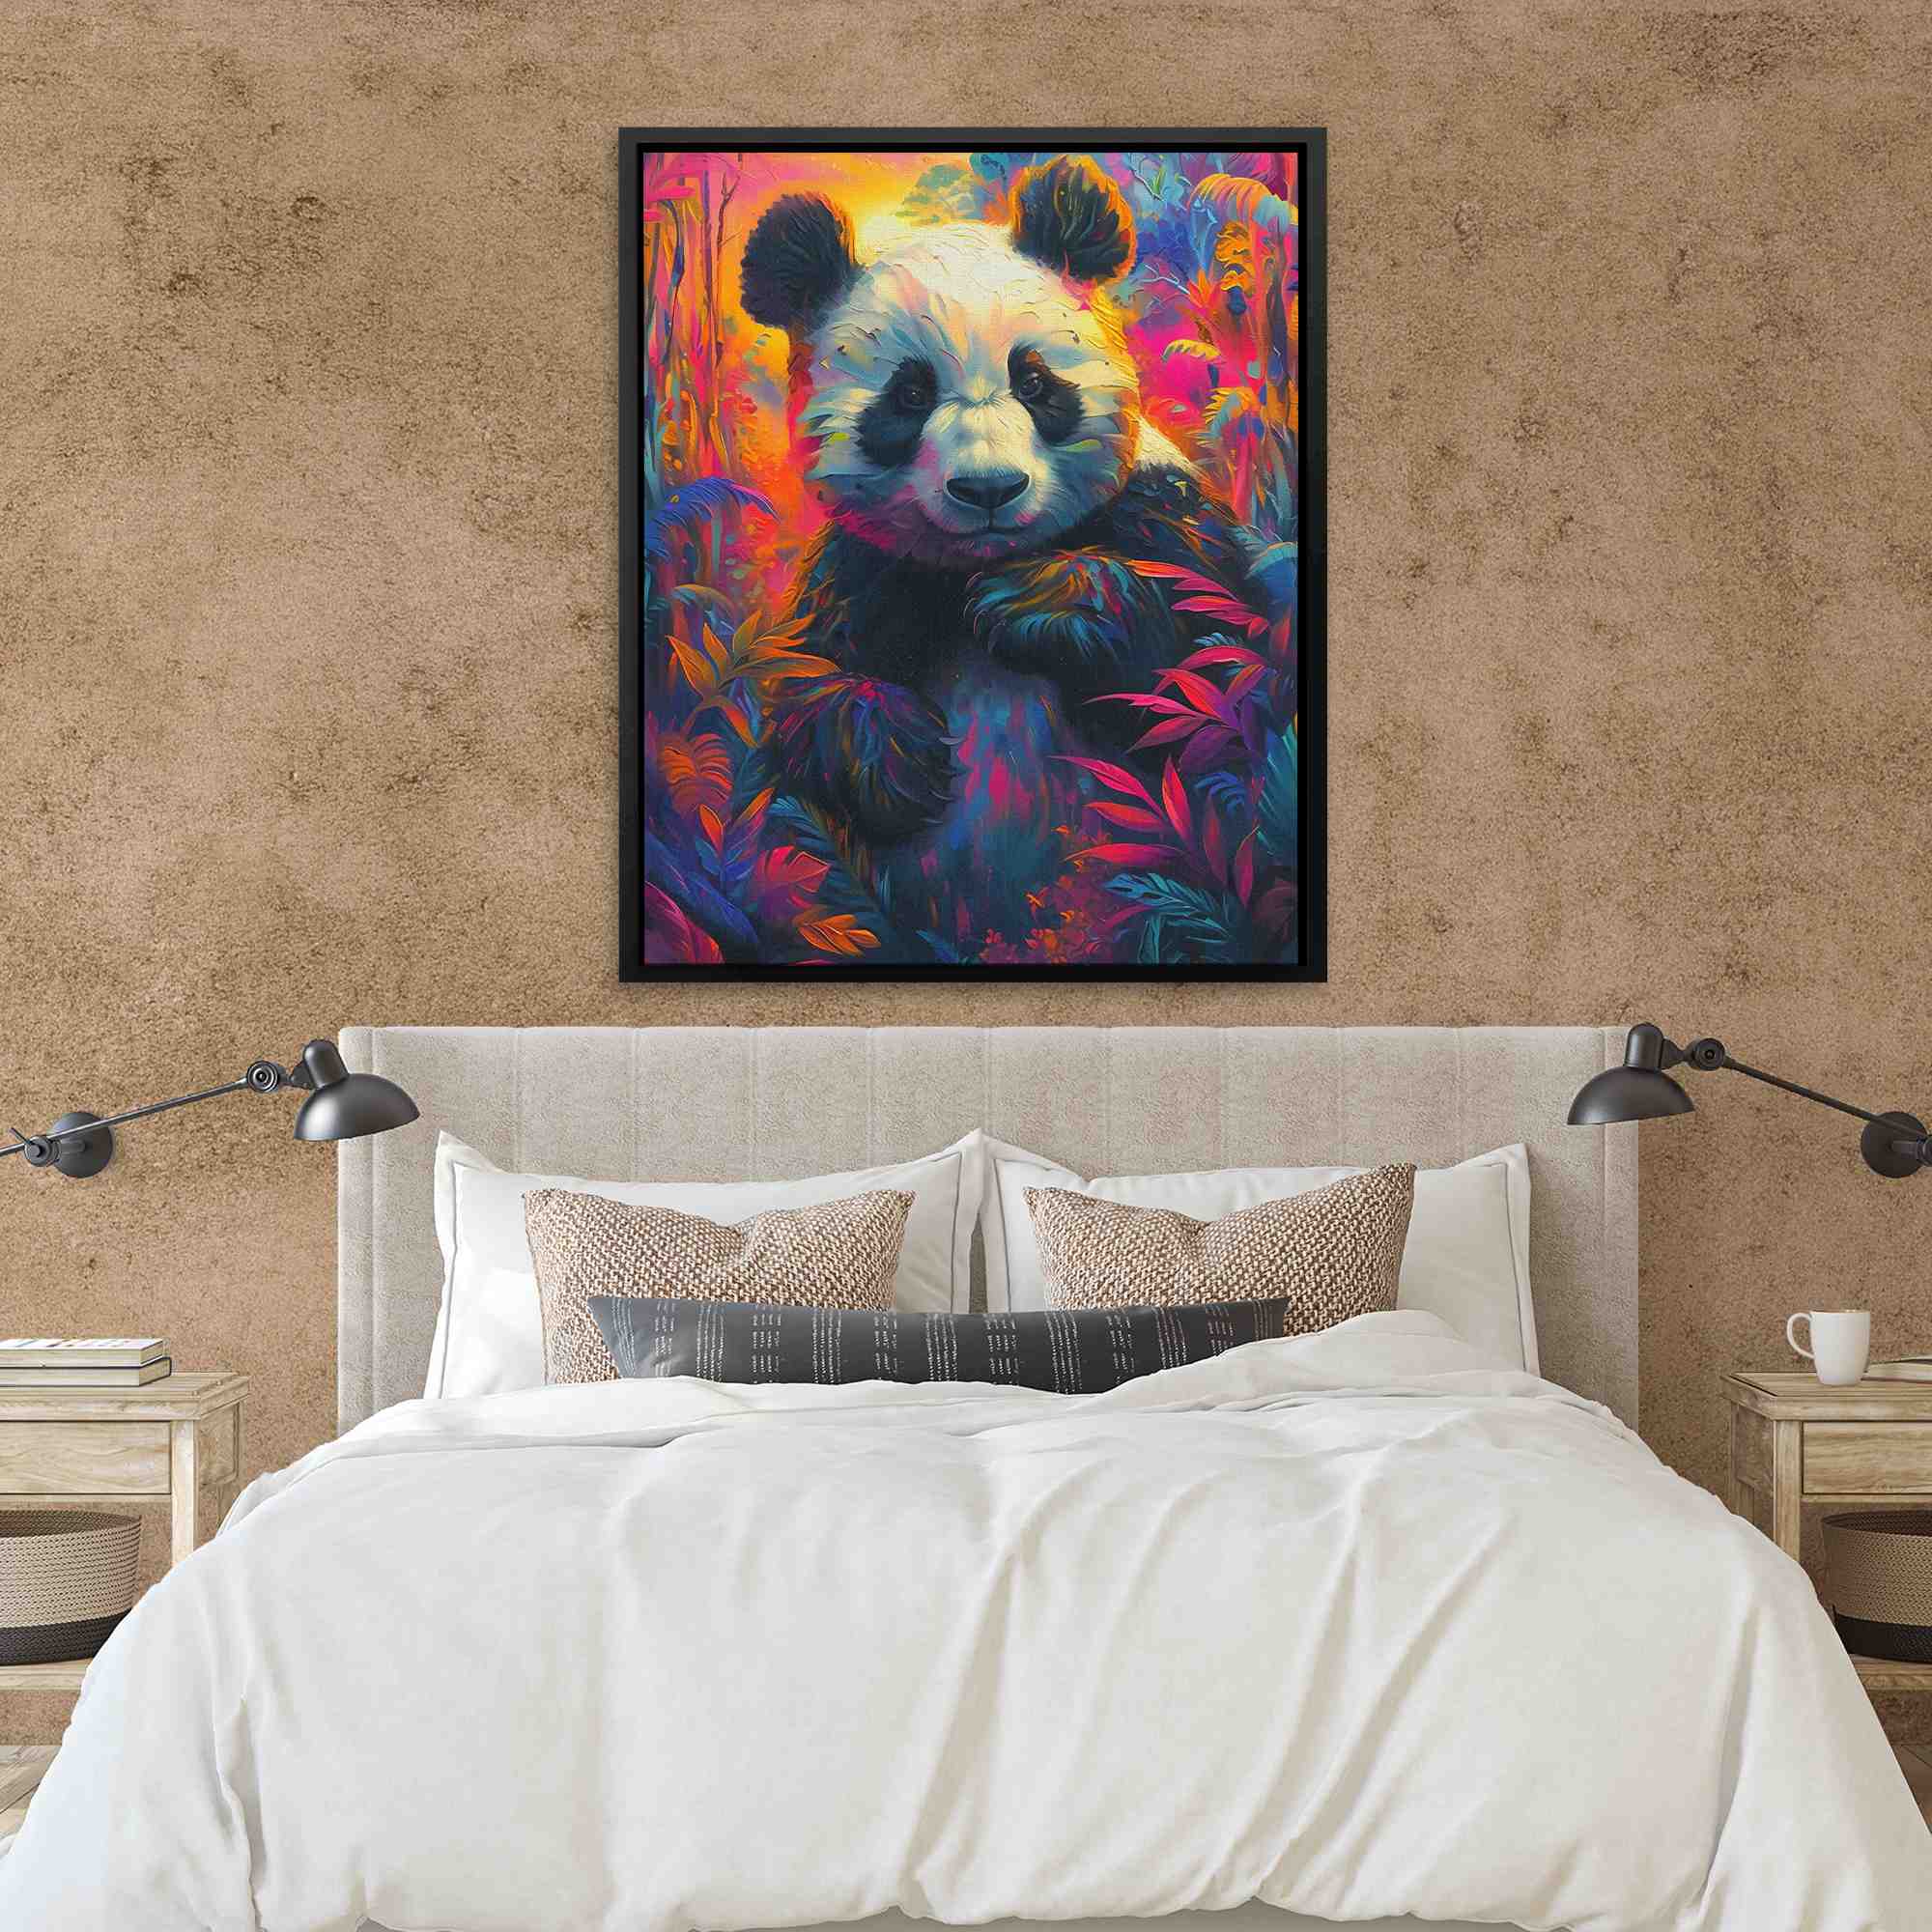 a painting of a panda bear in a colorful forest